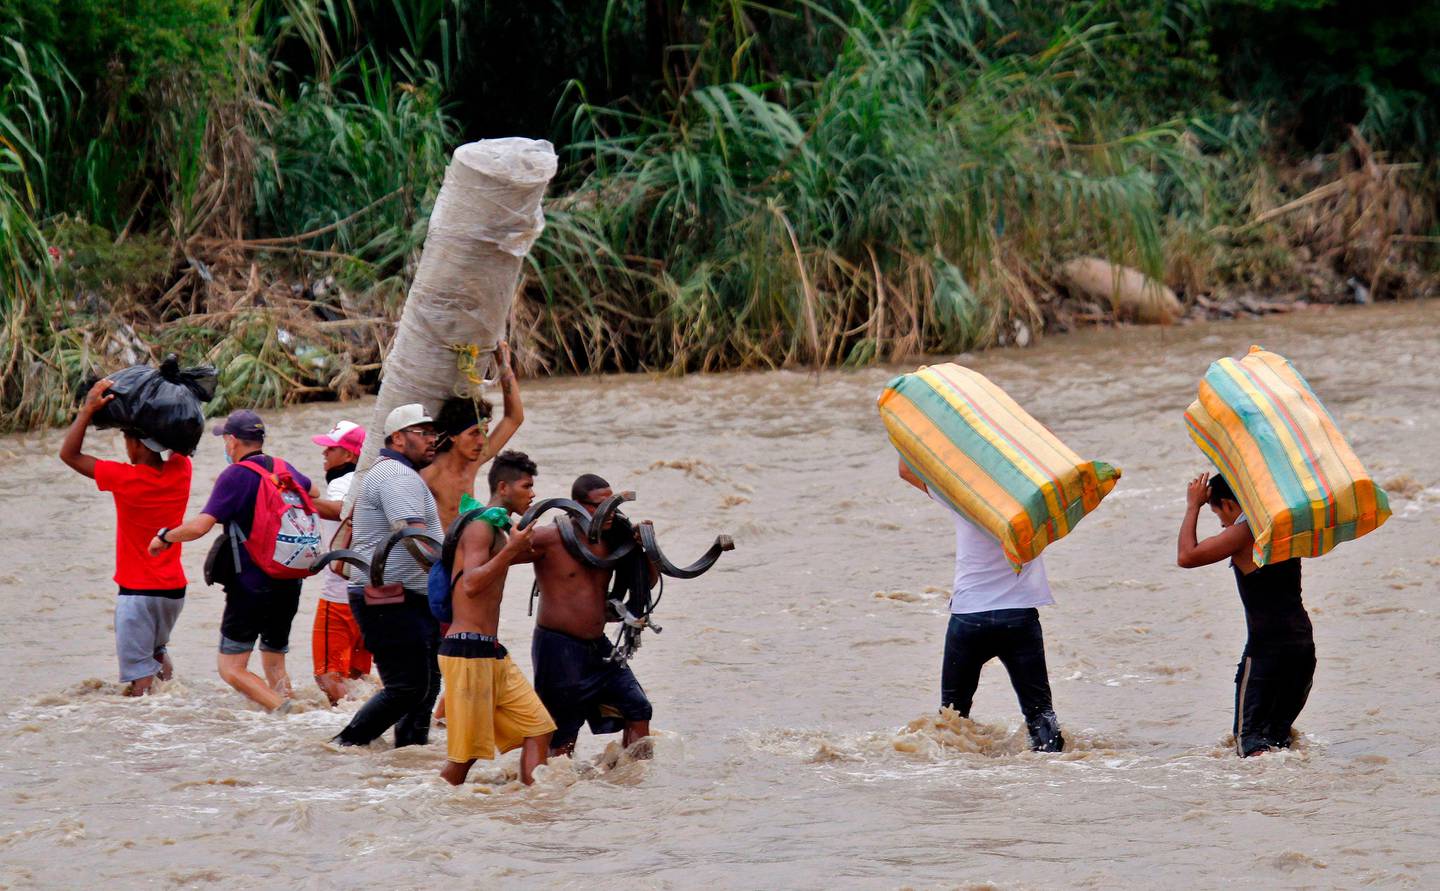 Migrants cross the Tachira river, the natural border between Colombia and Venezuela, as the official border remains closed due to the COVID-19 pandemic in Cucuta, Colombia, on November 19, 2020. - Hundreds of Venezuelans stranded in Colombia tried to cross the international bridge Wednesday as heavy rains had increased the river level. (Photo by Schneyder MENDOZA / AFP)